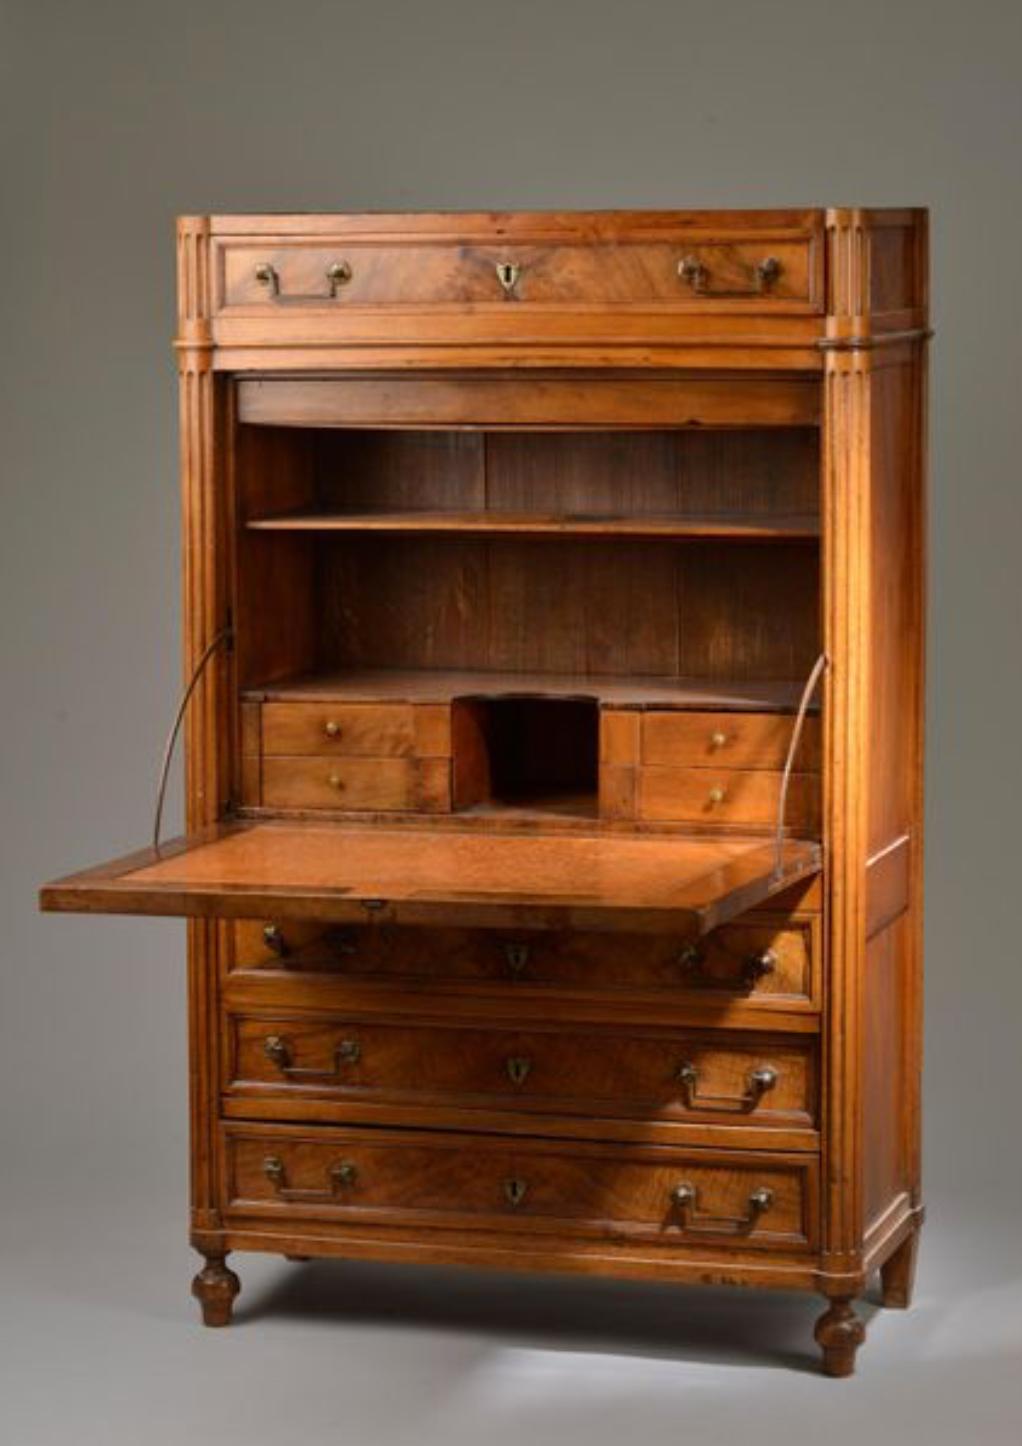 19th century folding secretary in walnut veneer and flamed mahogany opening to a drawer in the upper part and three drawers in the lower part, the fluted uprights resting on small spinning feet. Original key is available. 
France, circa